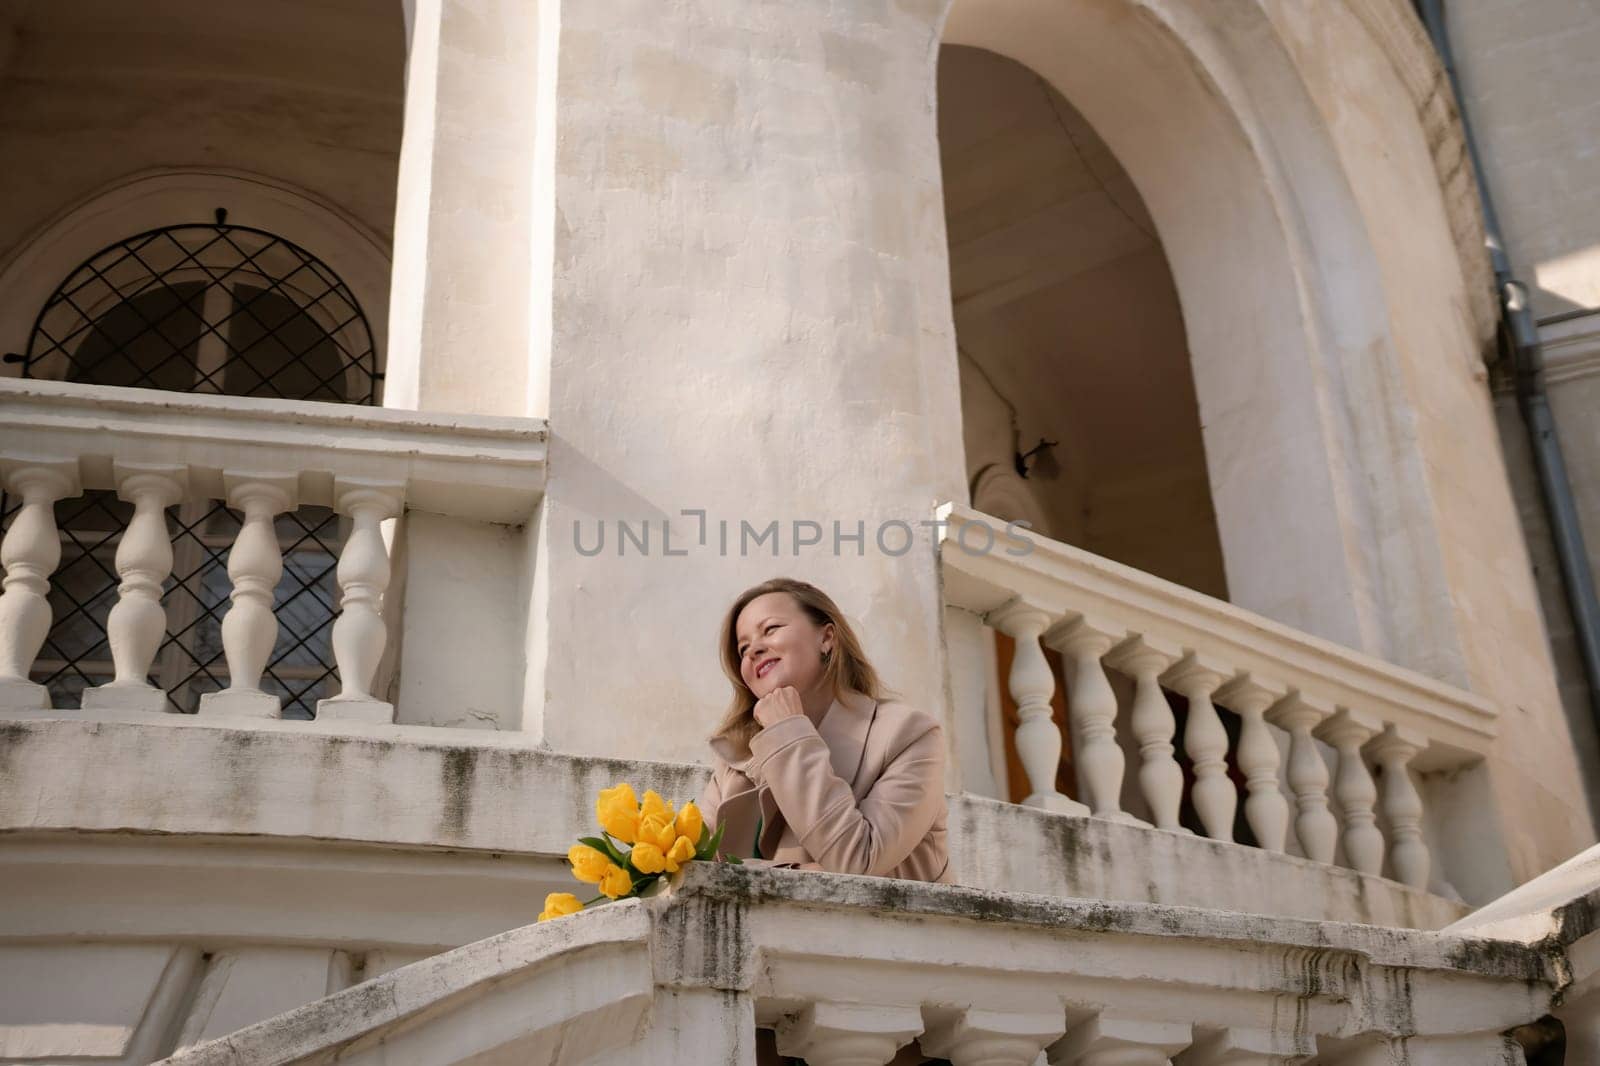 A woman wearing sunglasses and holding a bouquet of yellow flowers stands on a balcony. The scene is peaceful and serene, with the woman looking out over the city. by Matiunina